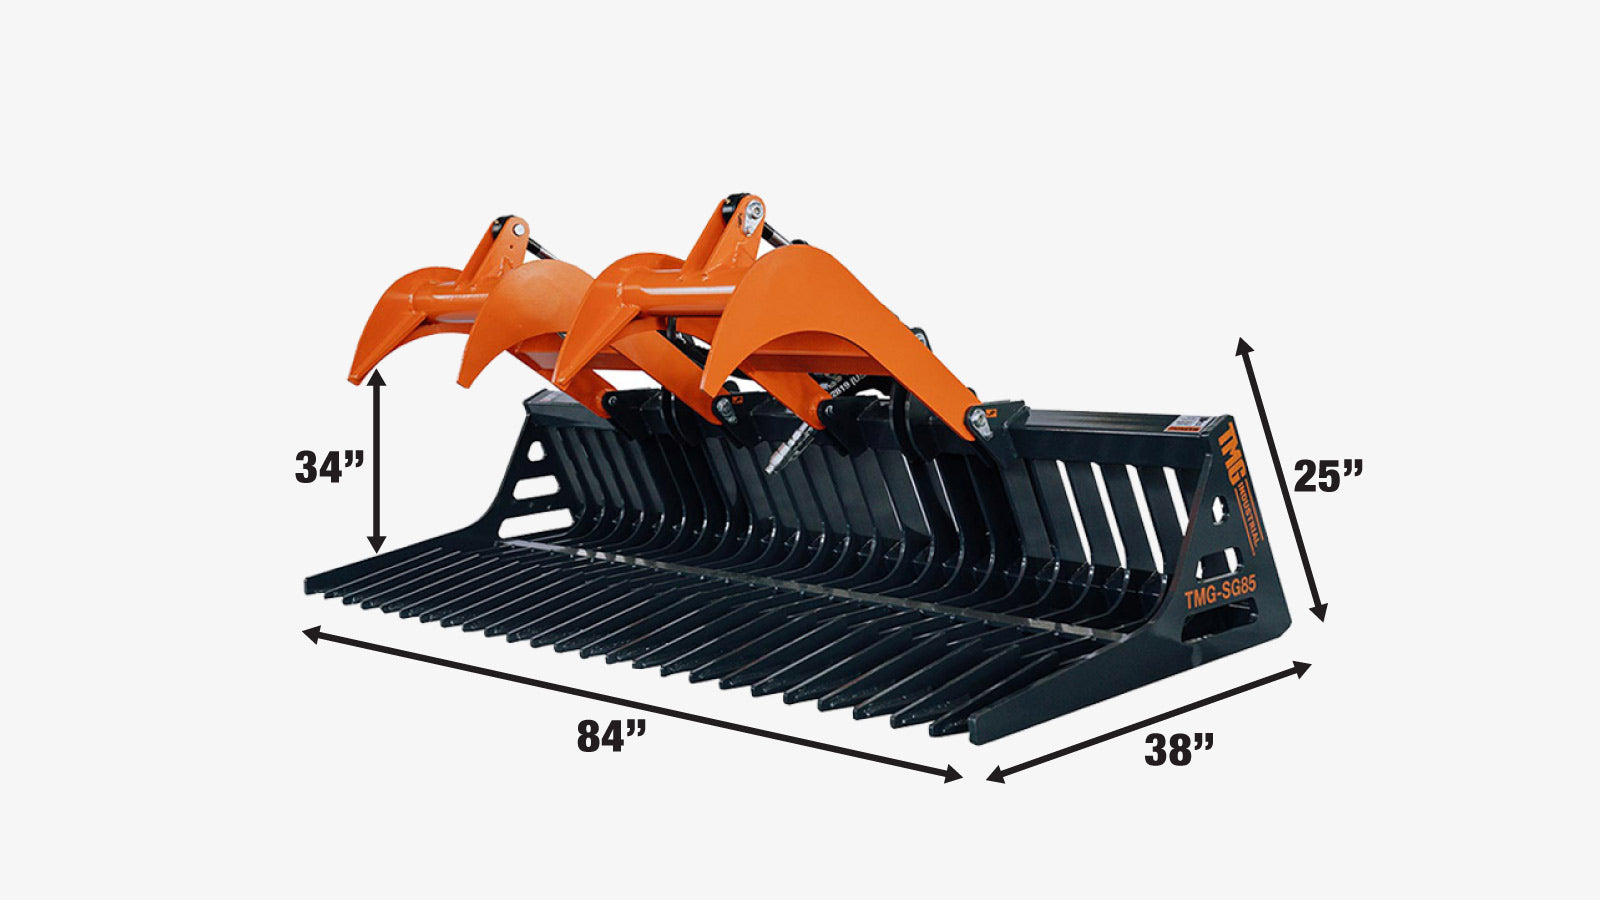 TMG Industrial 84” Skid Steer Skeleton Grapple Attachment, Universal Mount, 34” Arm Opening, 3” Tine Spacing, 2600 lb Weight Capacity, TMG-SG85-specifications-image